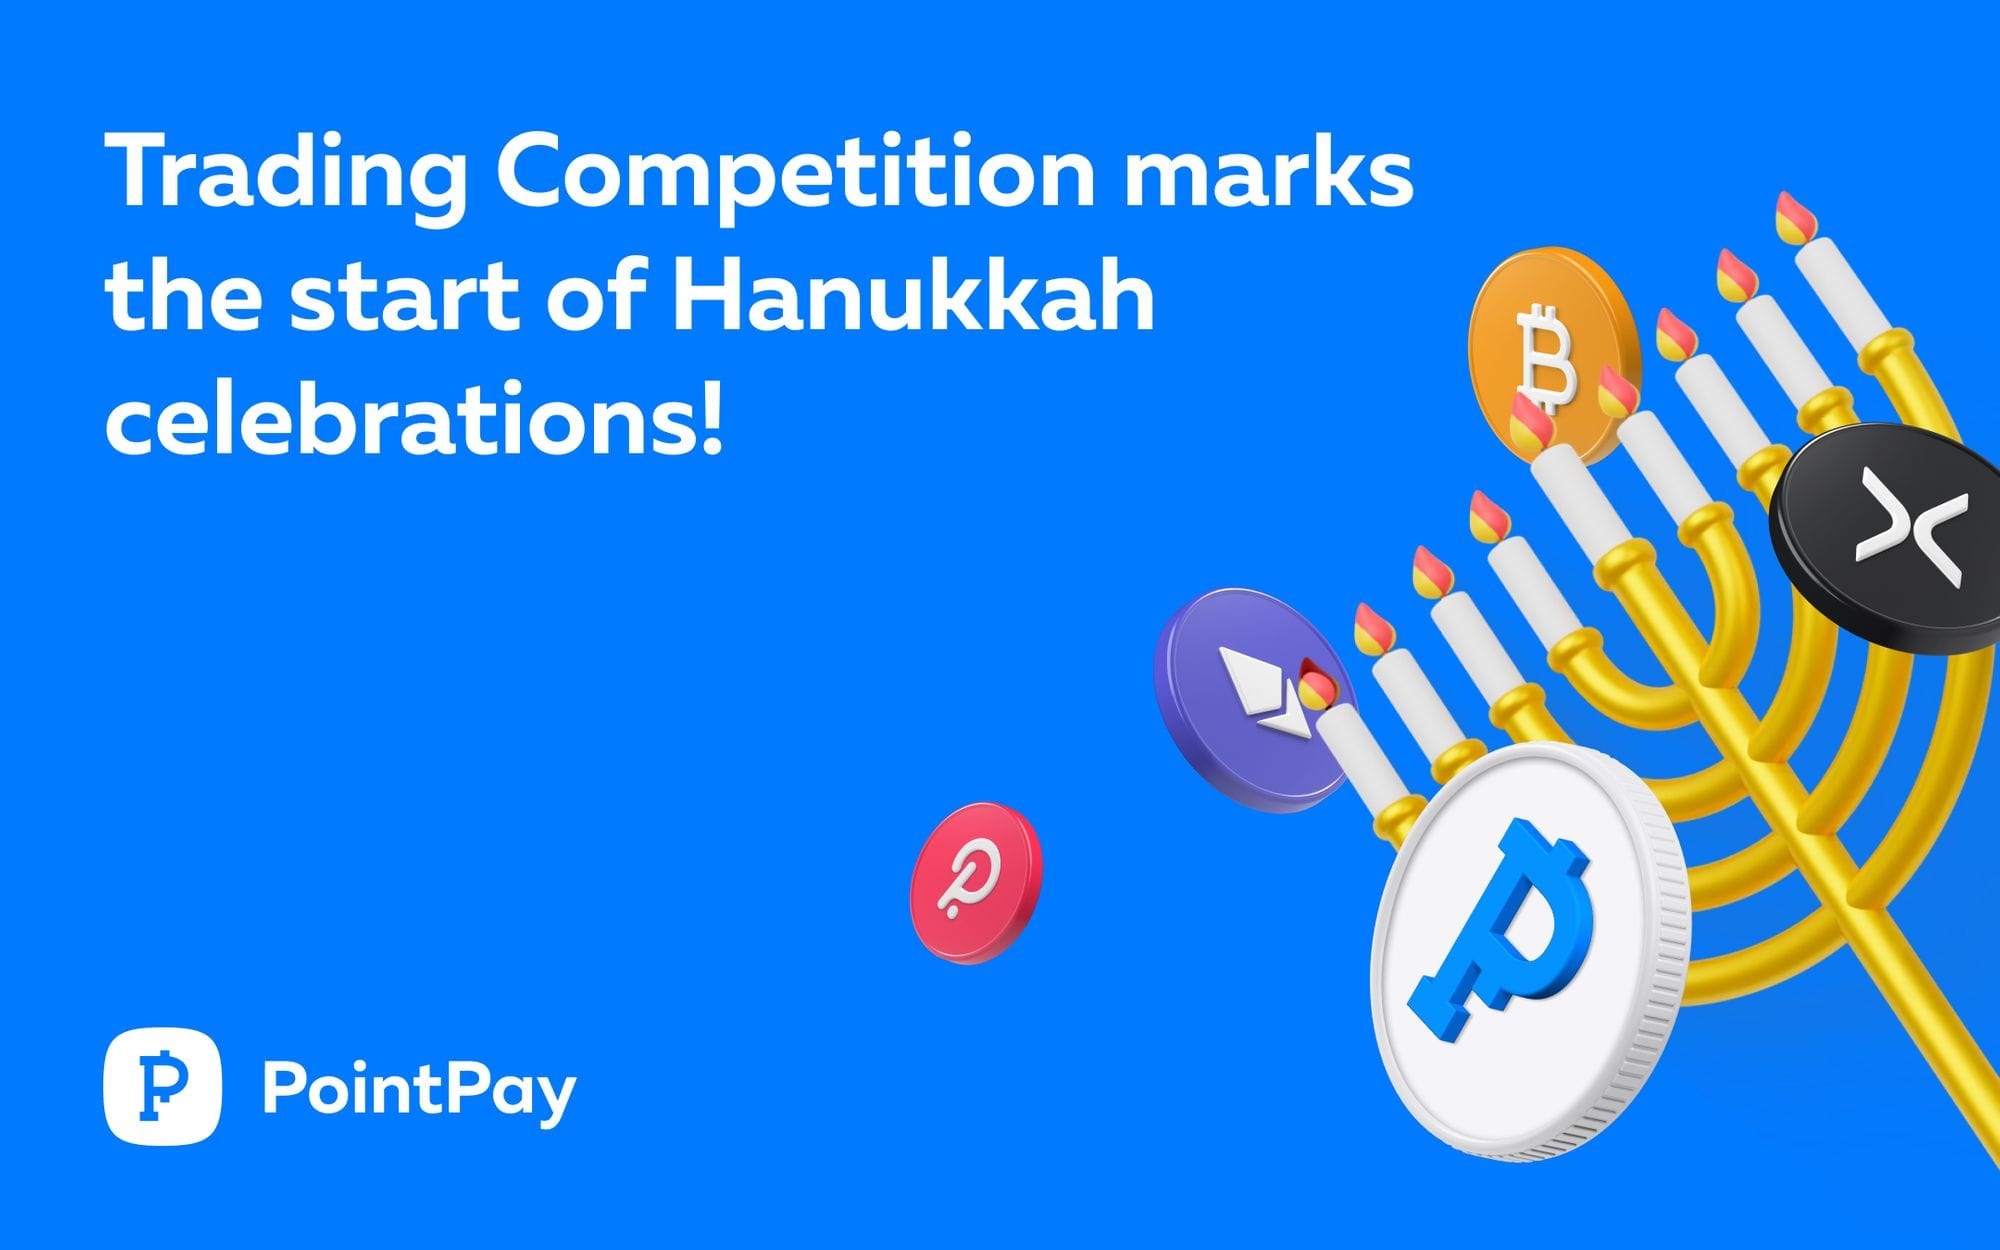 PointPay Celebrates Hanukkah with a USDT Trading Competition